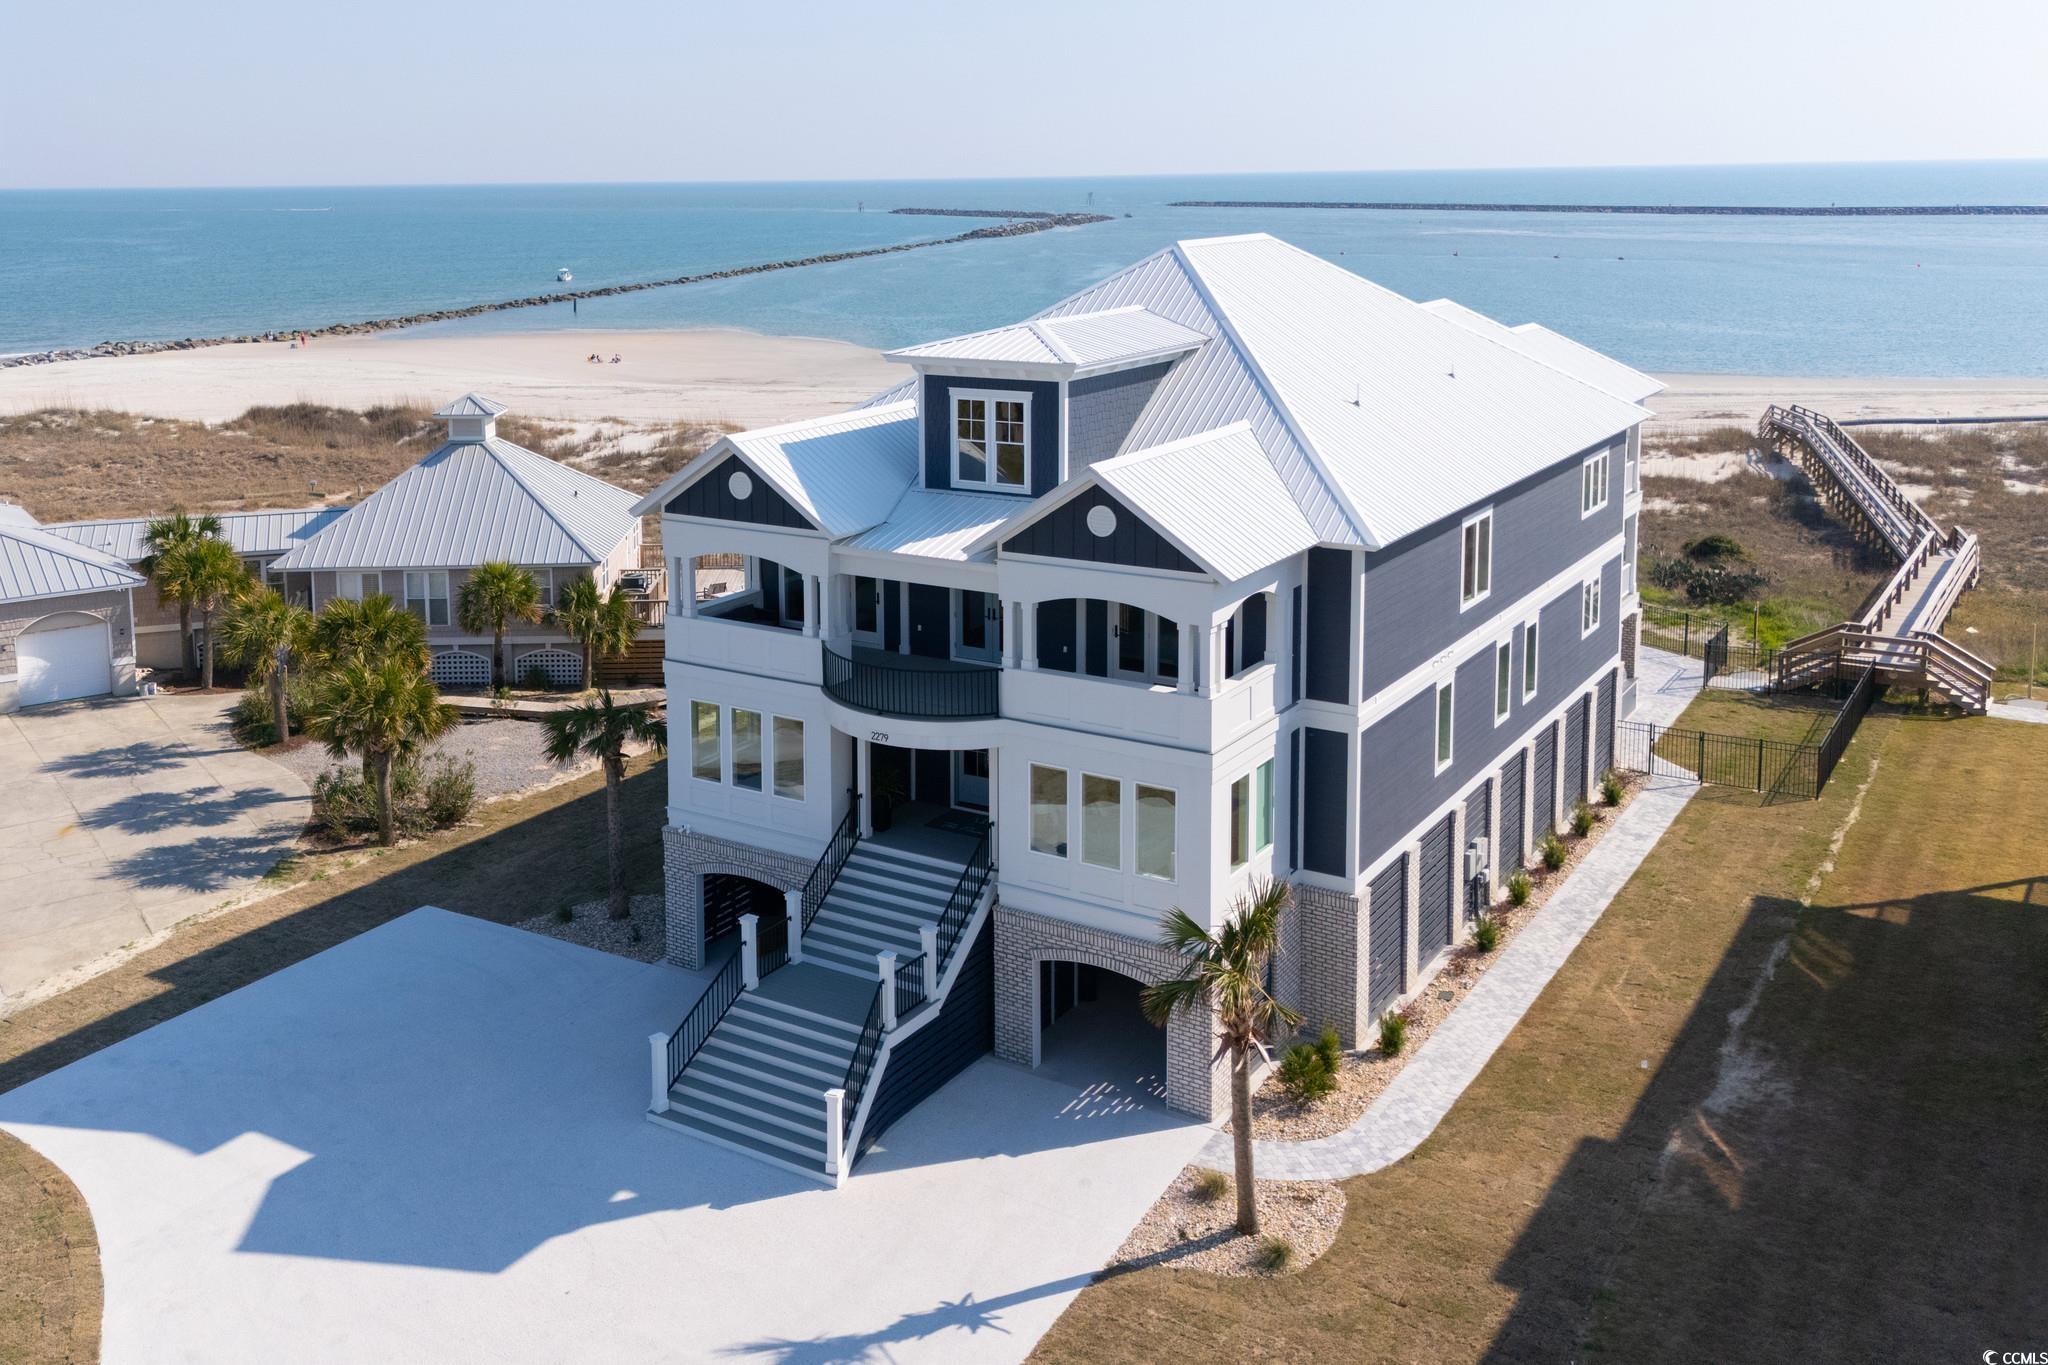 Myrtle Beach home for sale Murrells Inlet Inlet Harbour